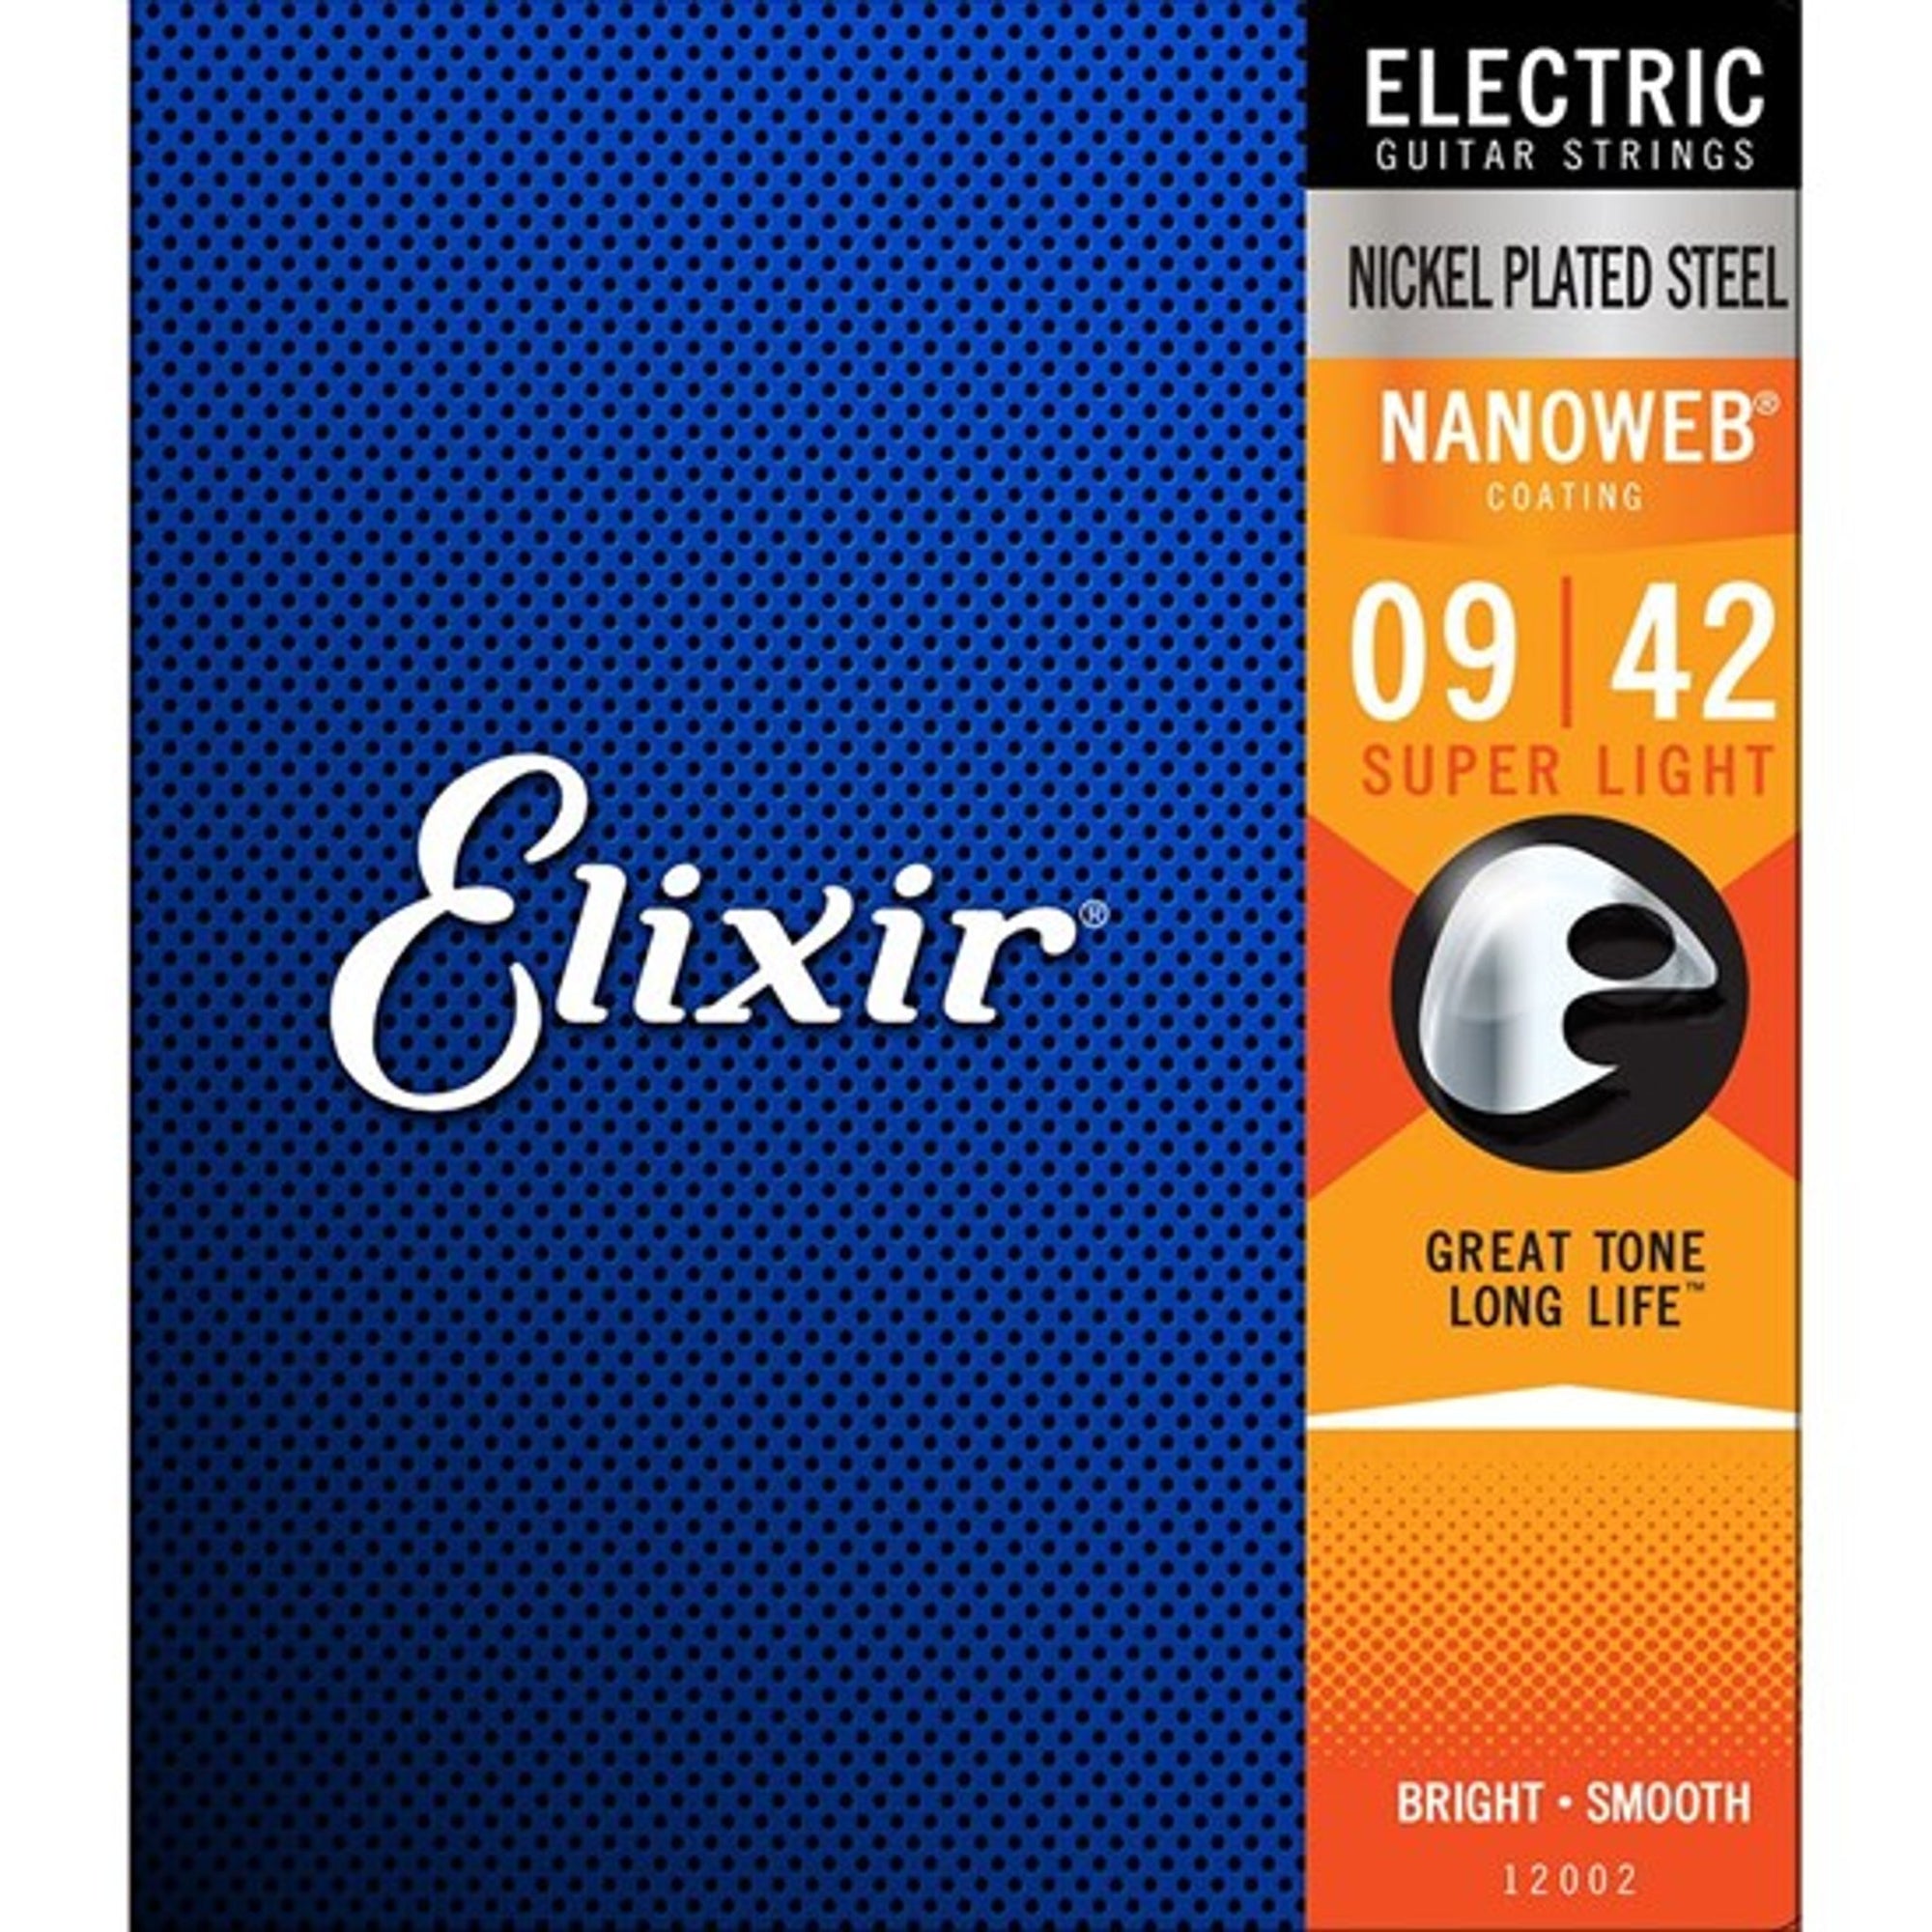 The Elixir 12002 strings are known for their great tone and long life. Elixir strings amp up your guitar’s tone life with the same premium electric guitar strings that experienced players worldwide trust